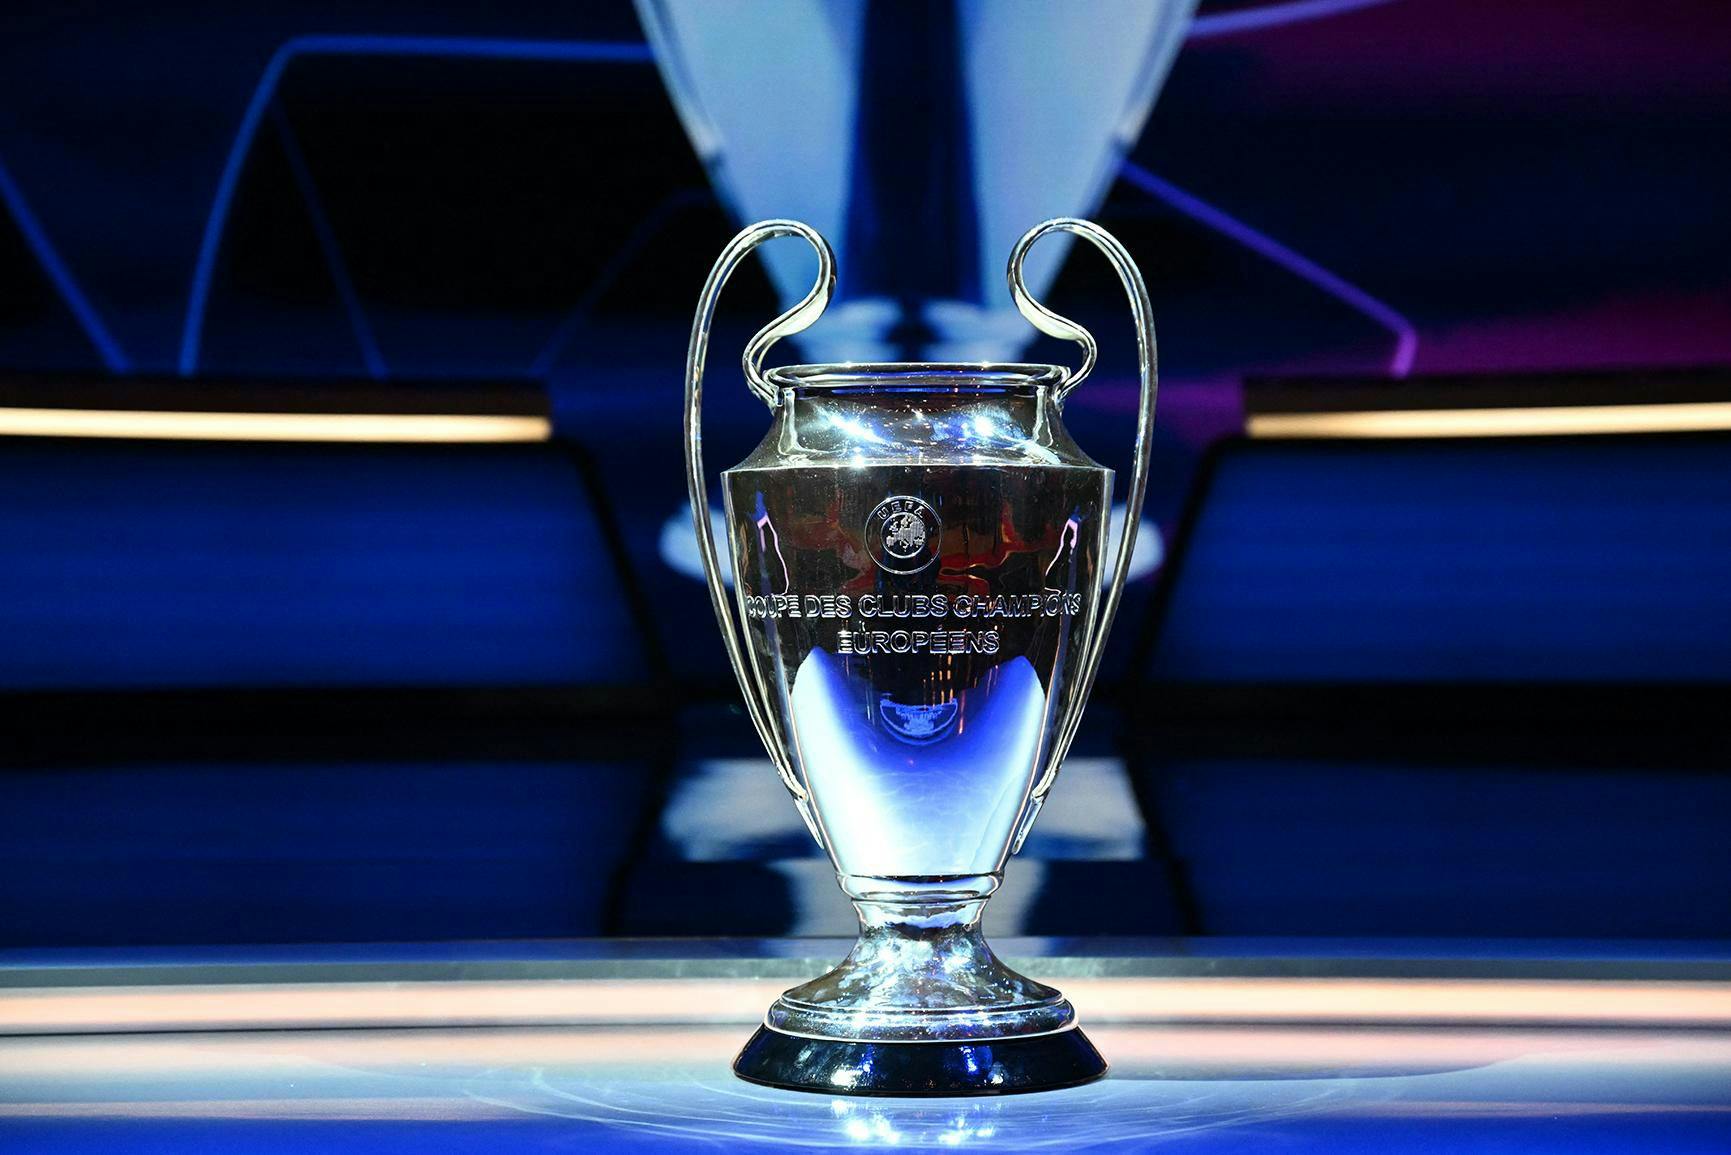 Champions League Trip Packages (Tickets, Flight And Hotel)